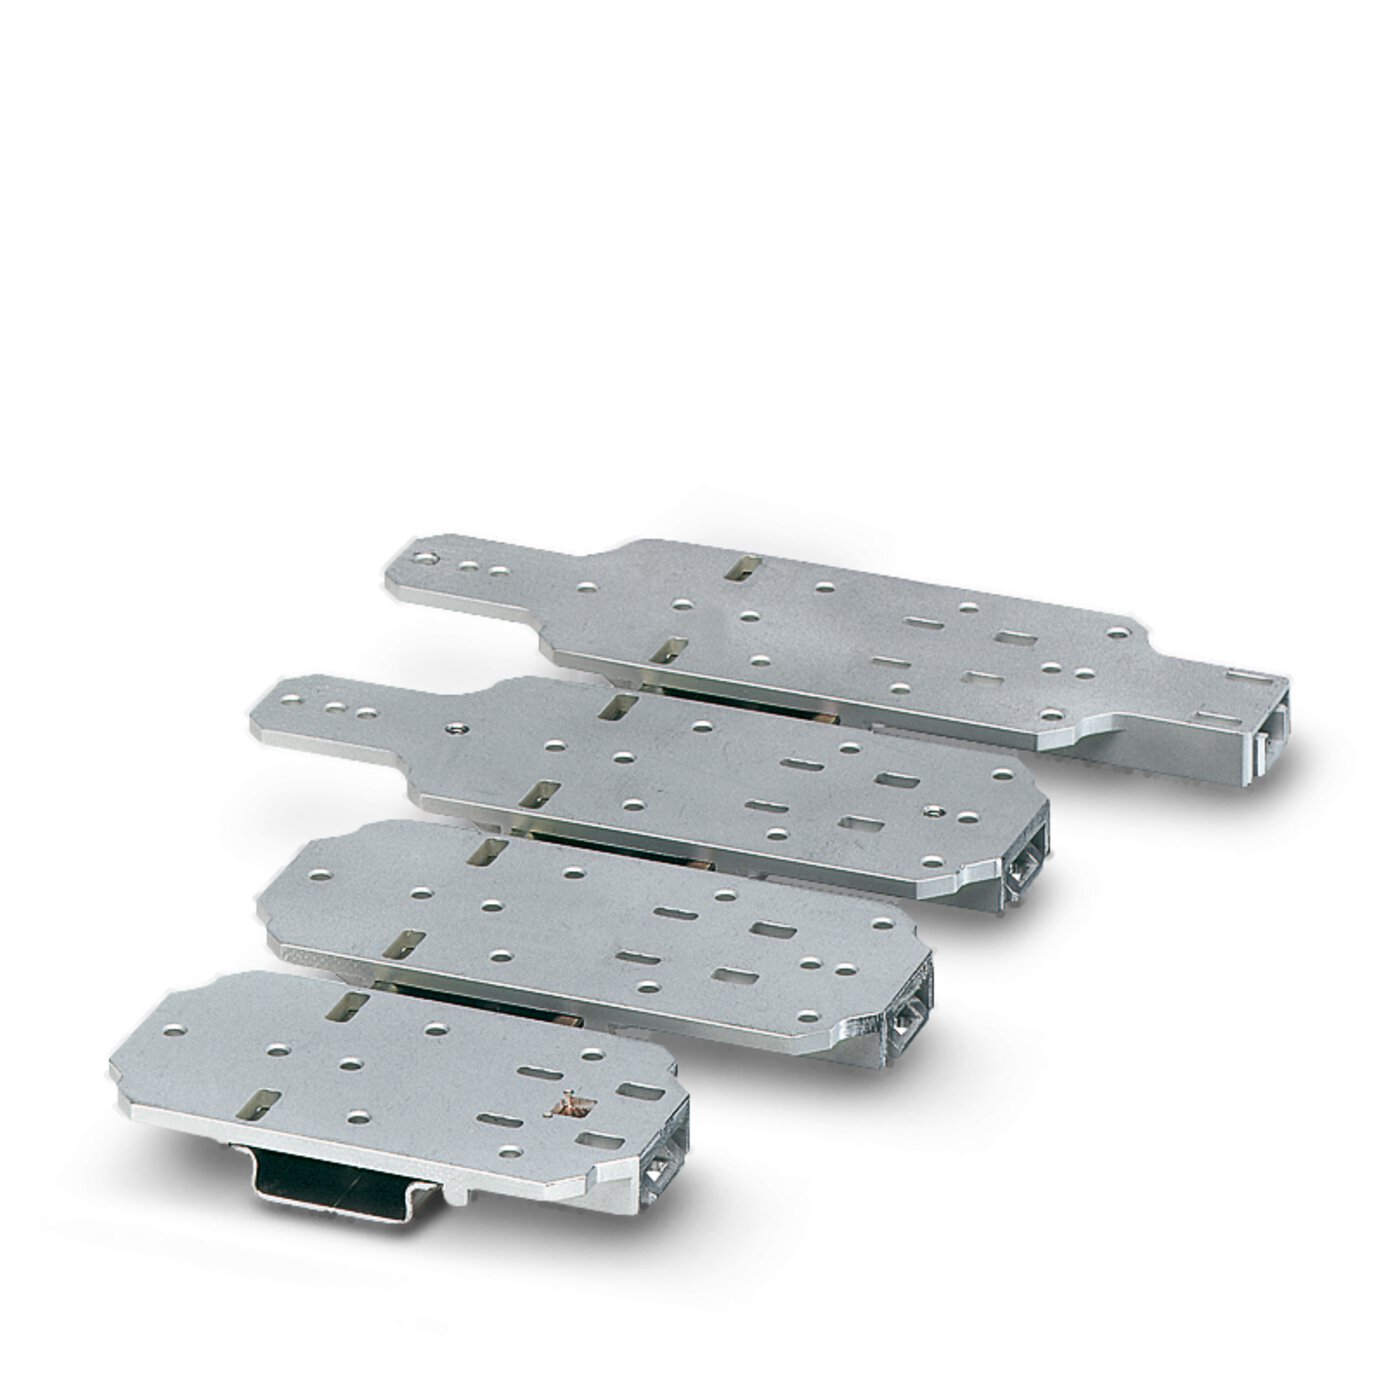 Zinc die-cast universal mounting plates for DIN rail